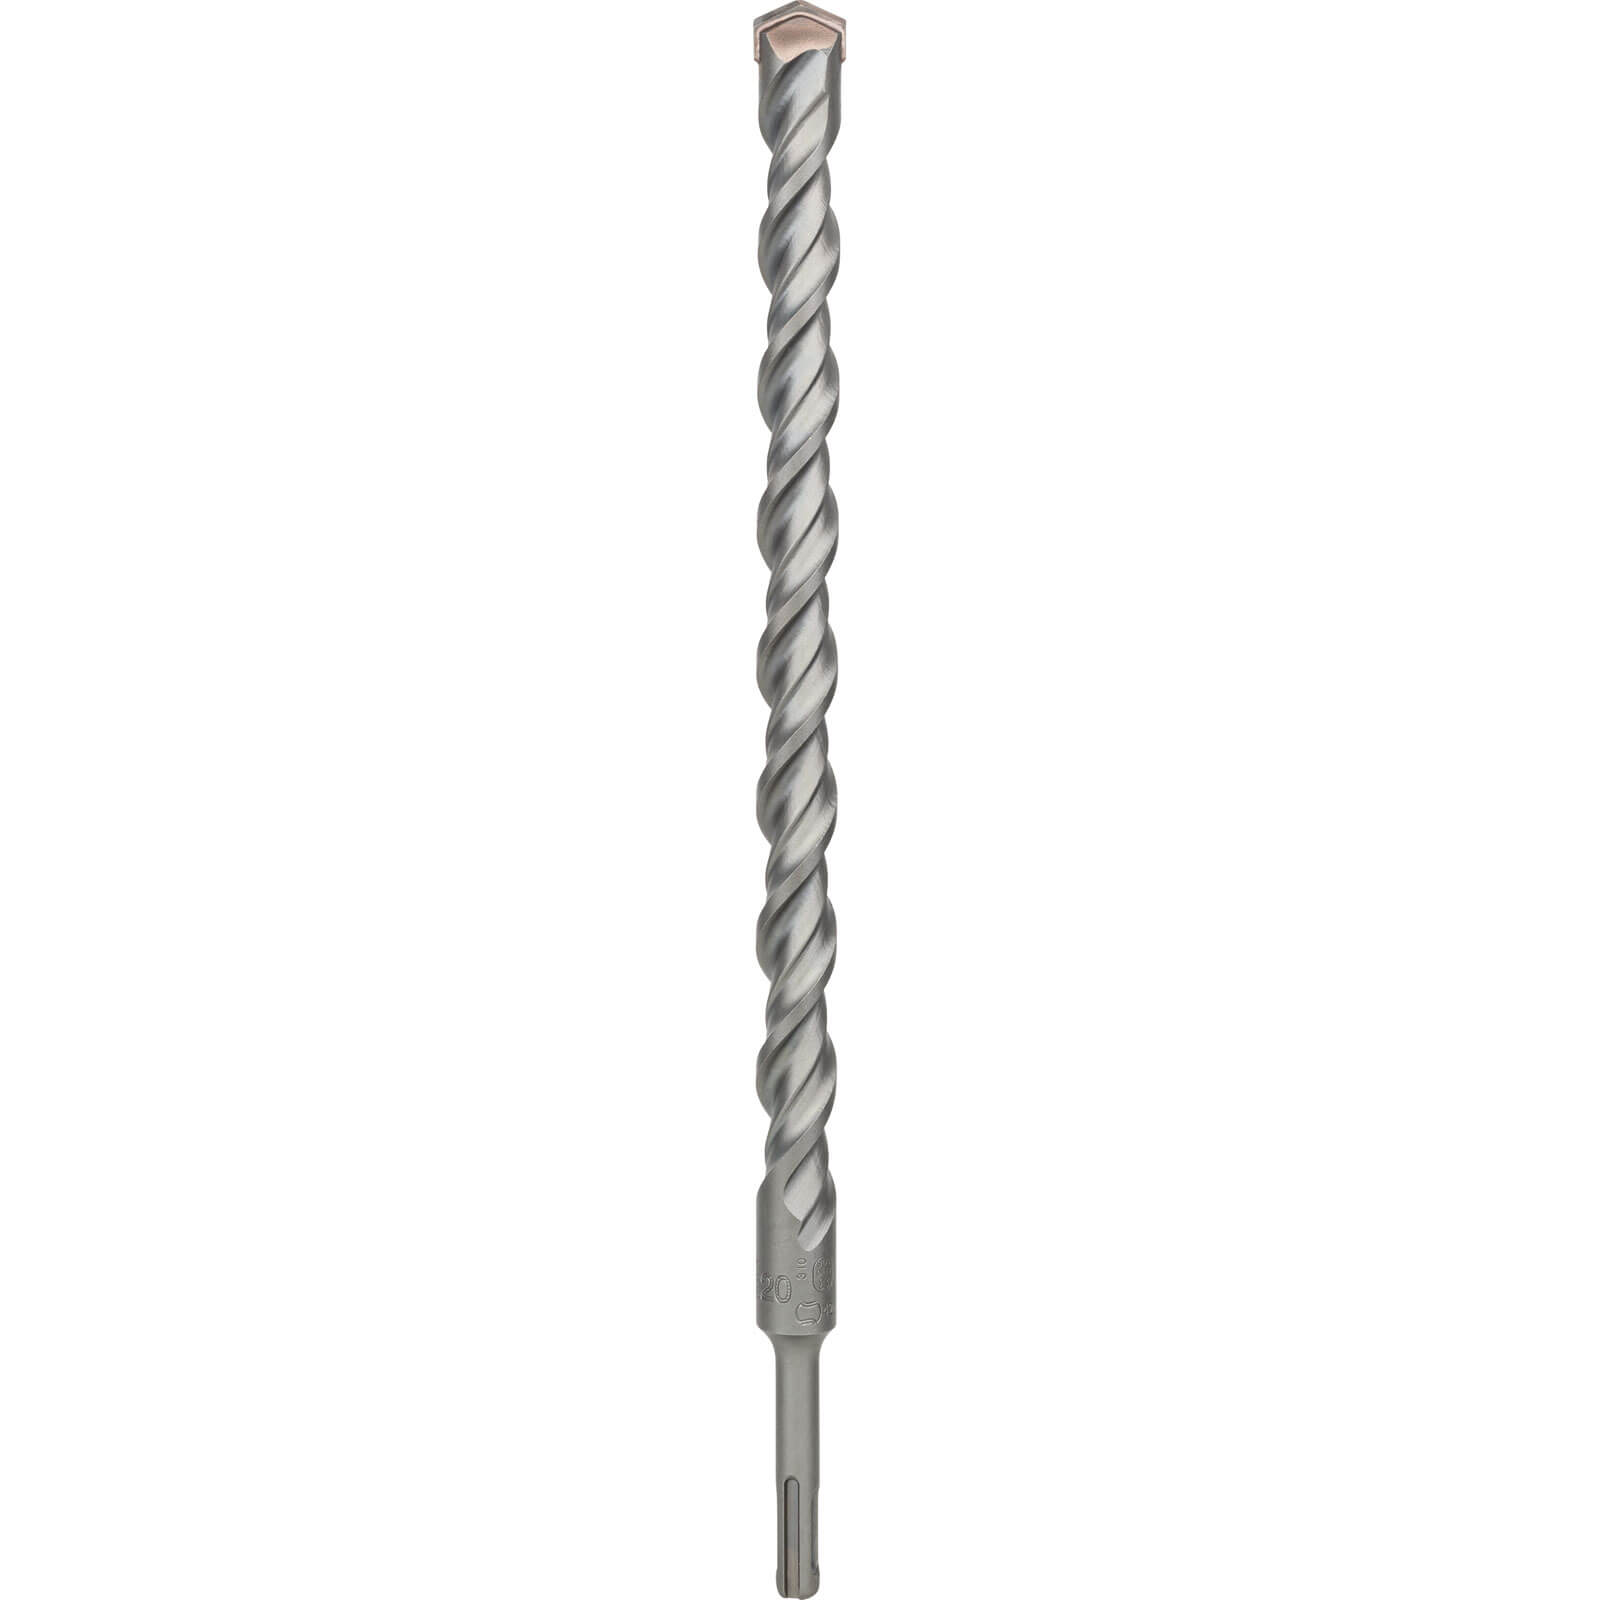 Image of Bosch Series 3 SDS Plus Masonry Drill Bit 20mm 350mm Pack of 1